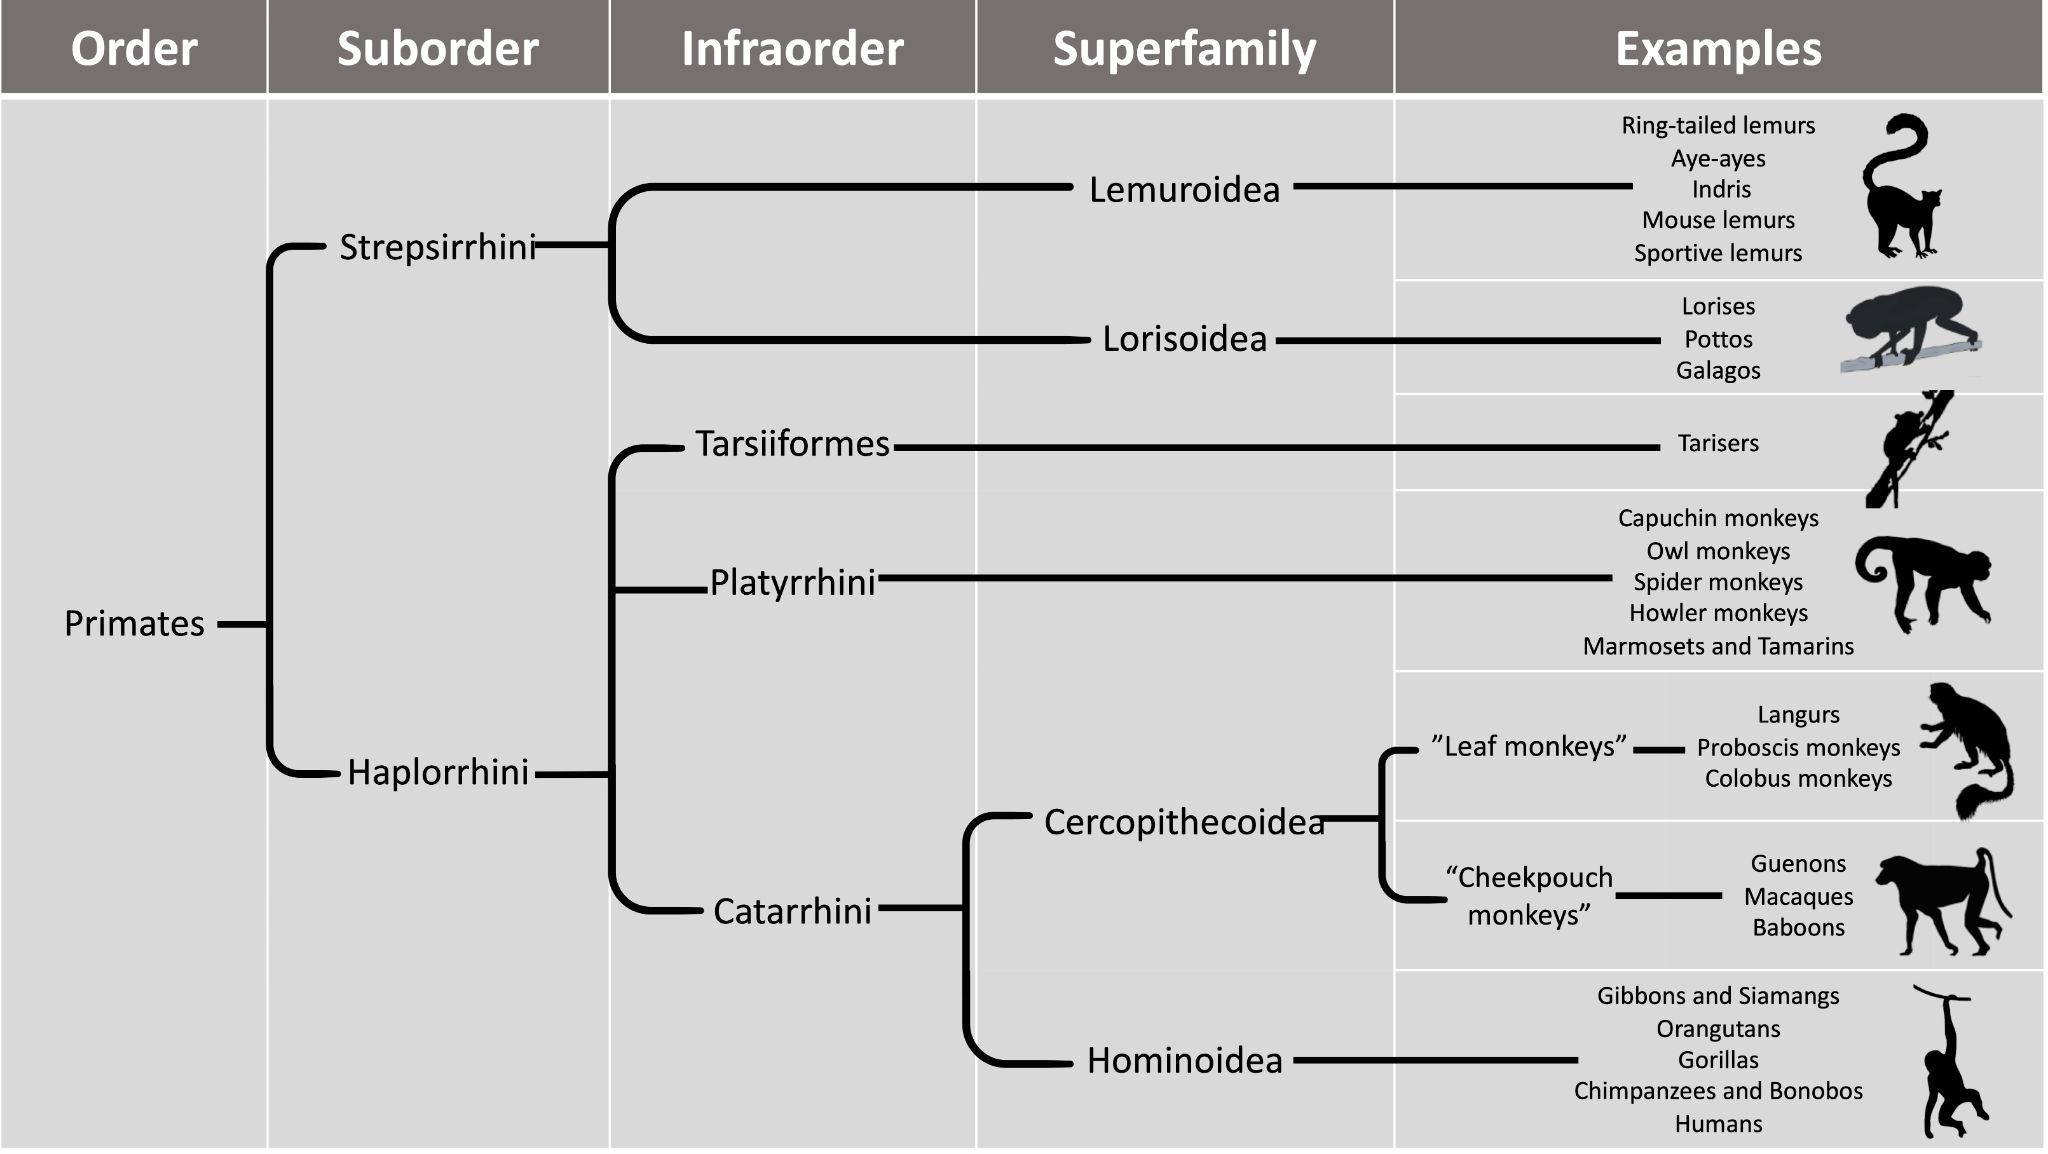 Taxonomic chart shows primate order, suborder, infraorder, superfamily, and species.